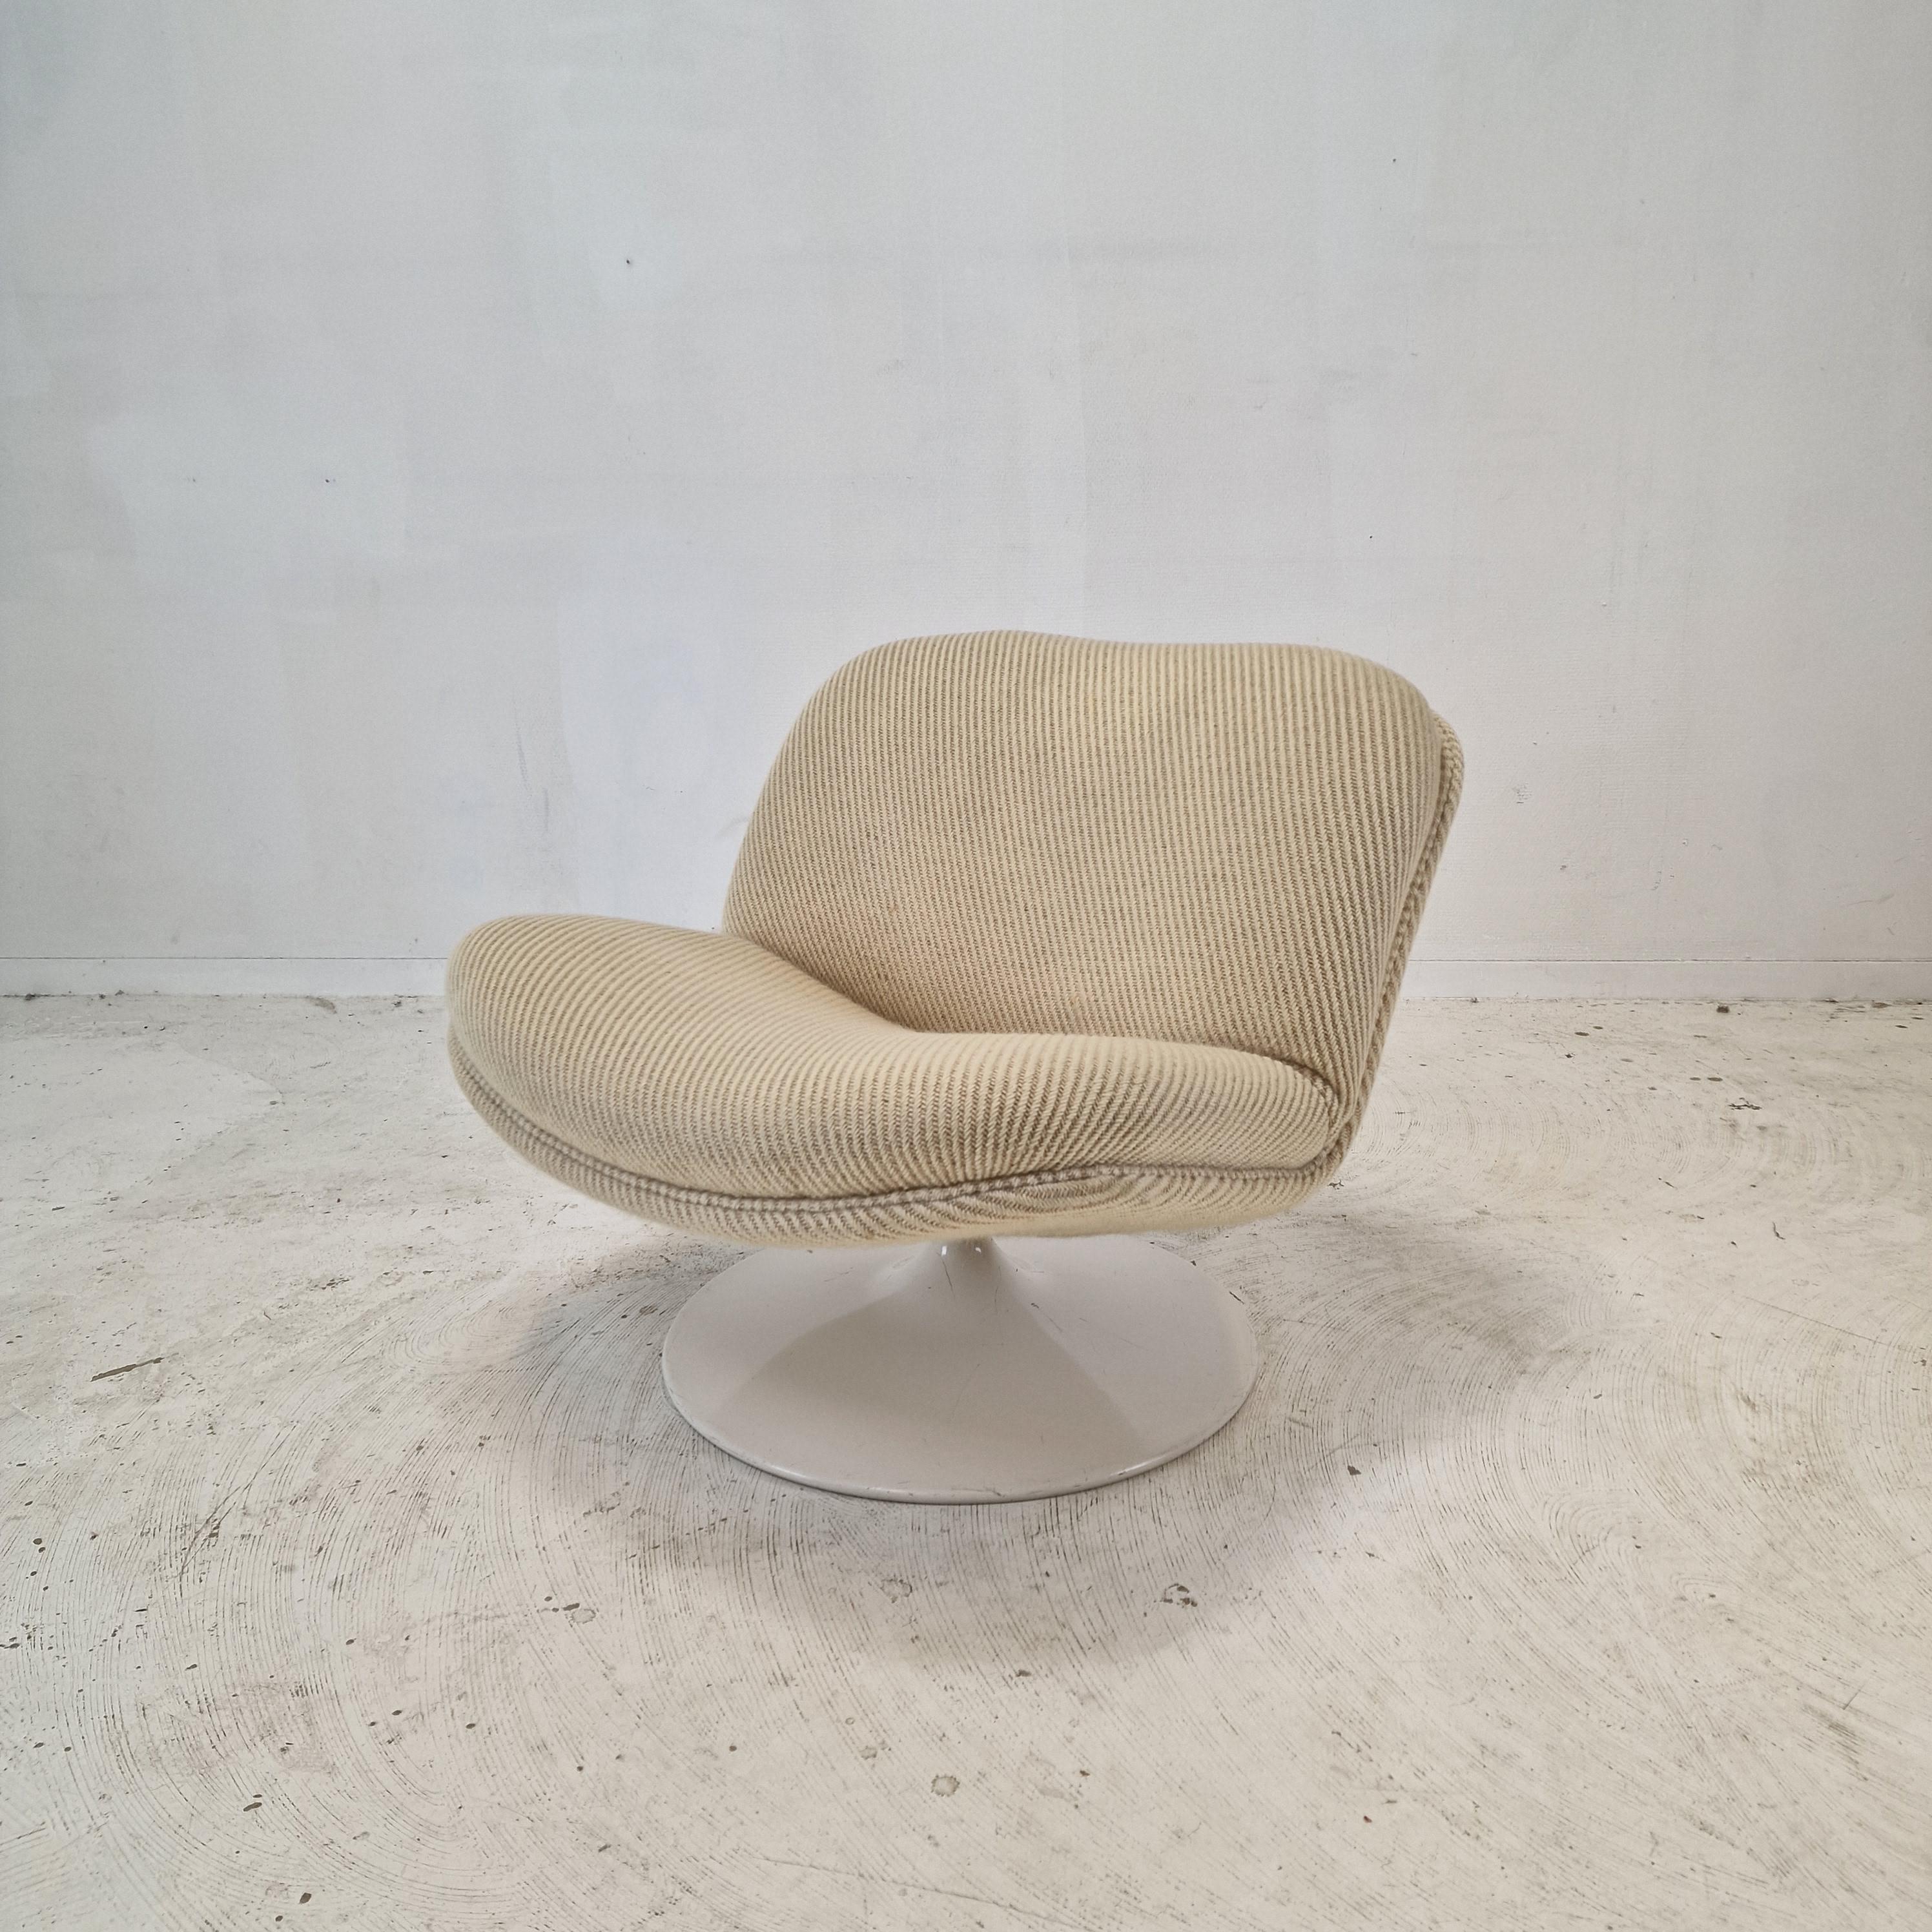 Very cute and comfortable 508 Lounge Chair designed by the famous Geoffrey Harcourt for Artifort in the 70's.

Very solid wooden frame with a large pivoting metal foot.  
The chair has the original high quality wool fabric, color beige. 
It has the